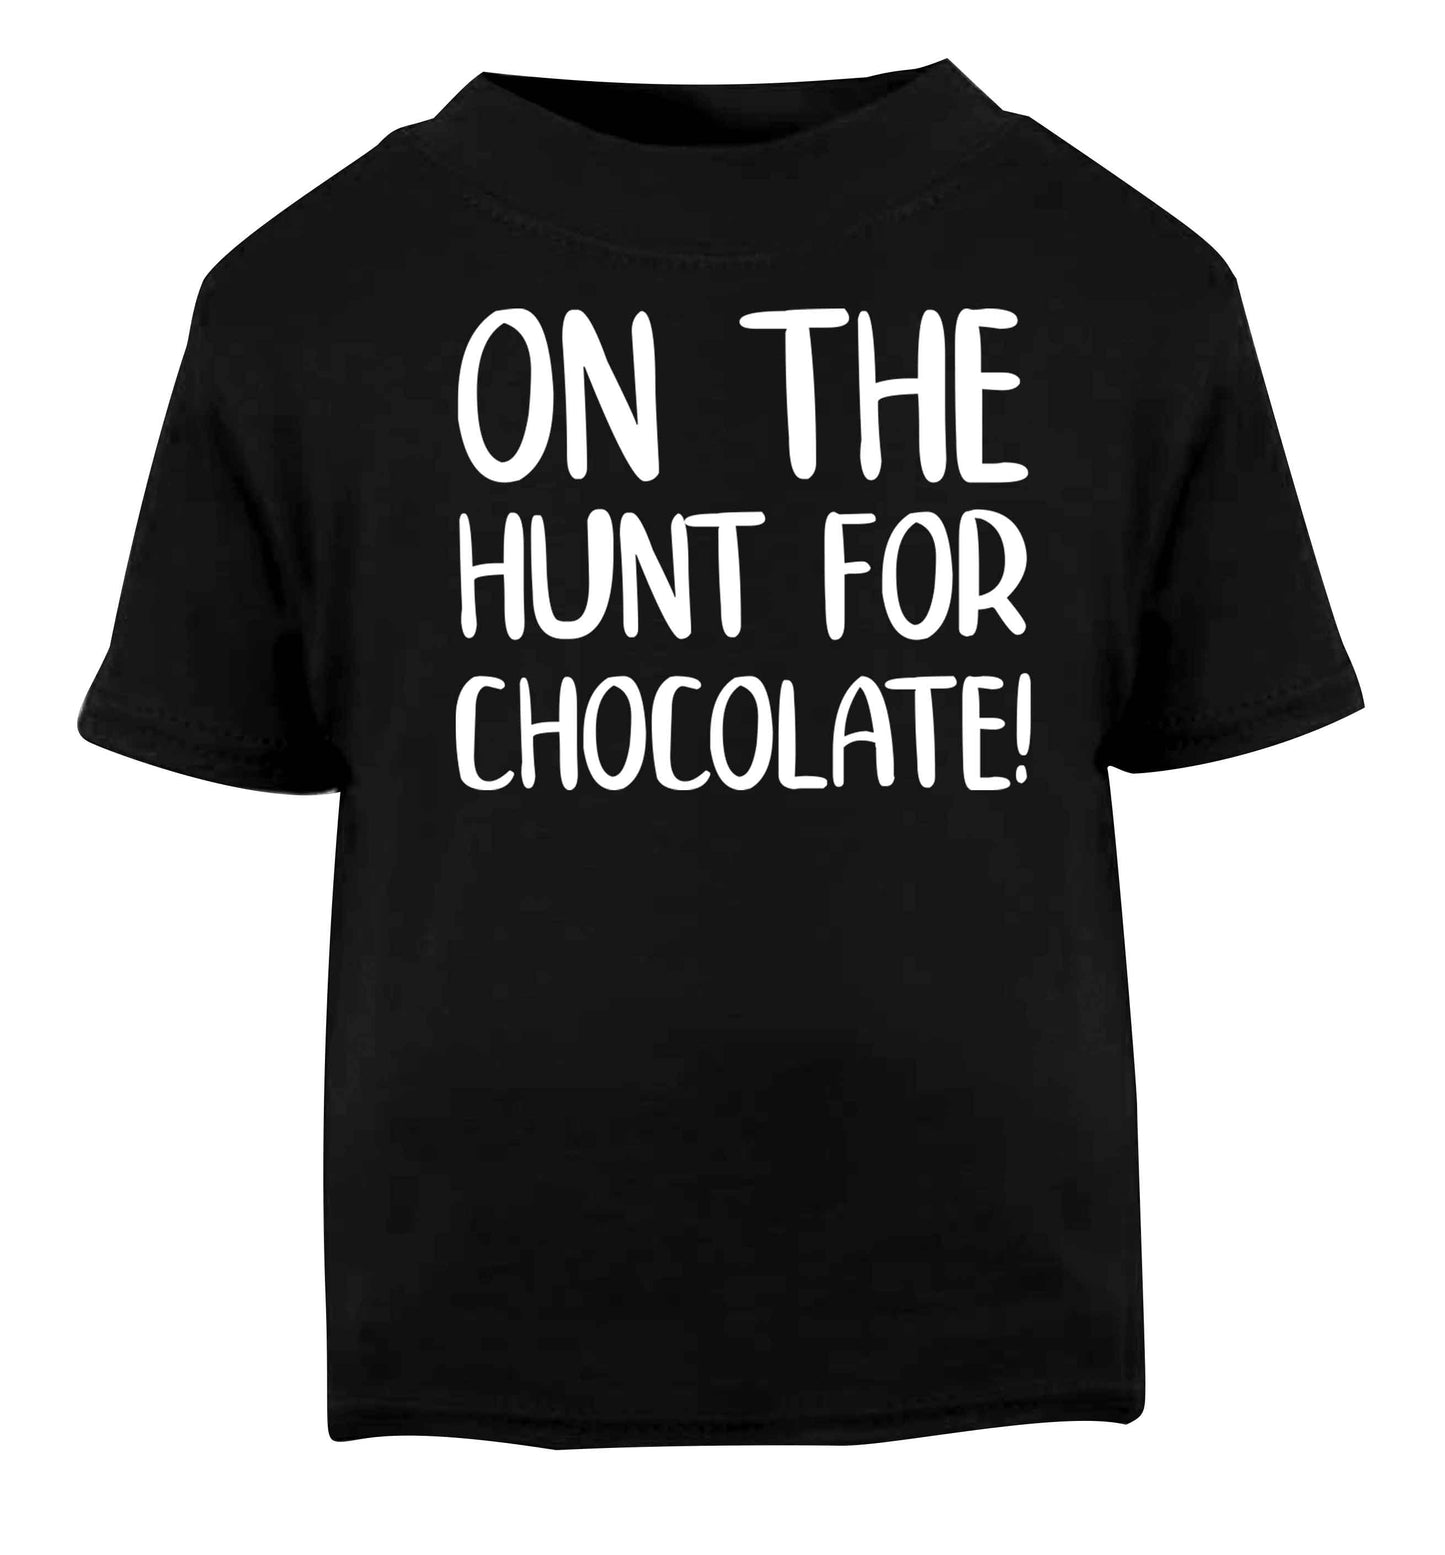 On the hunt for chocolate! Black baby toddler Tshirt 2 years